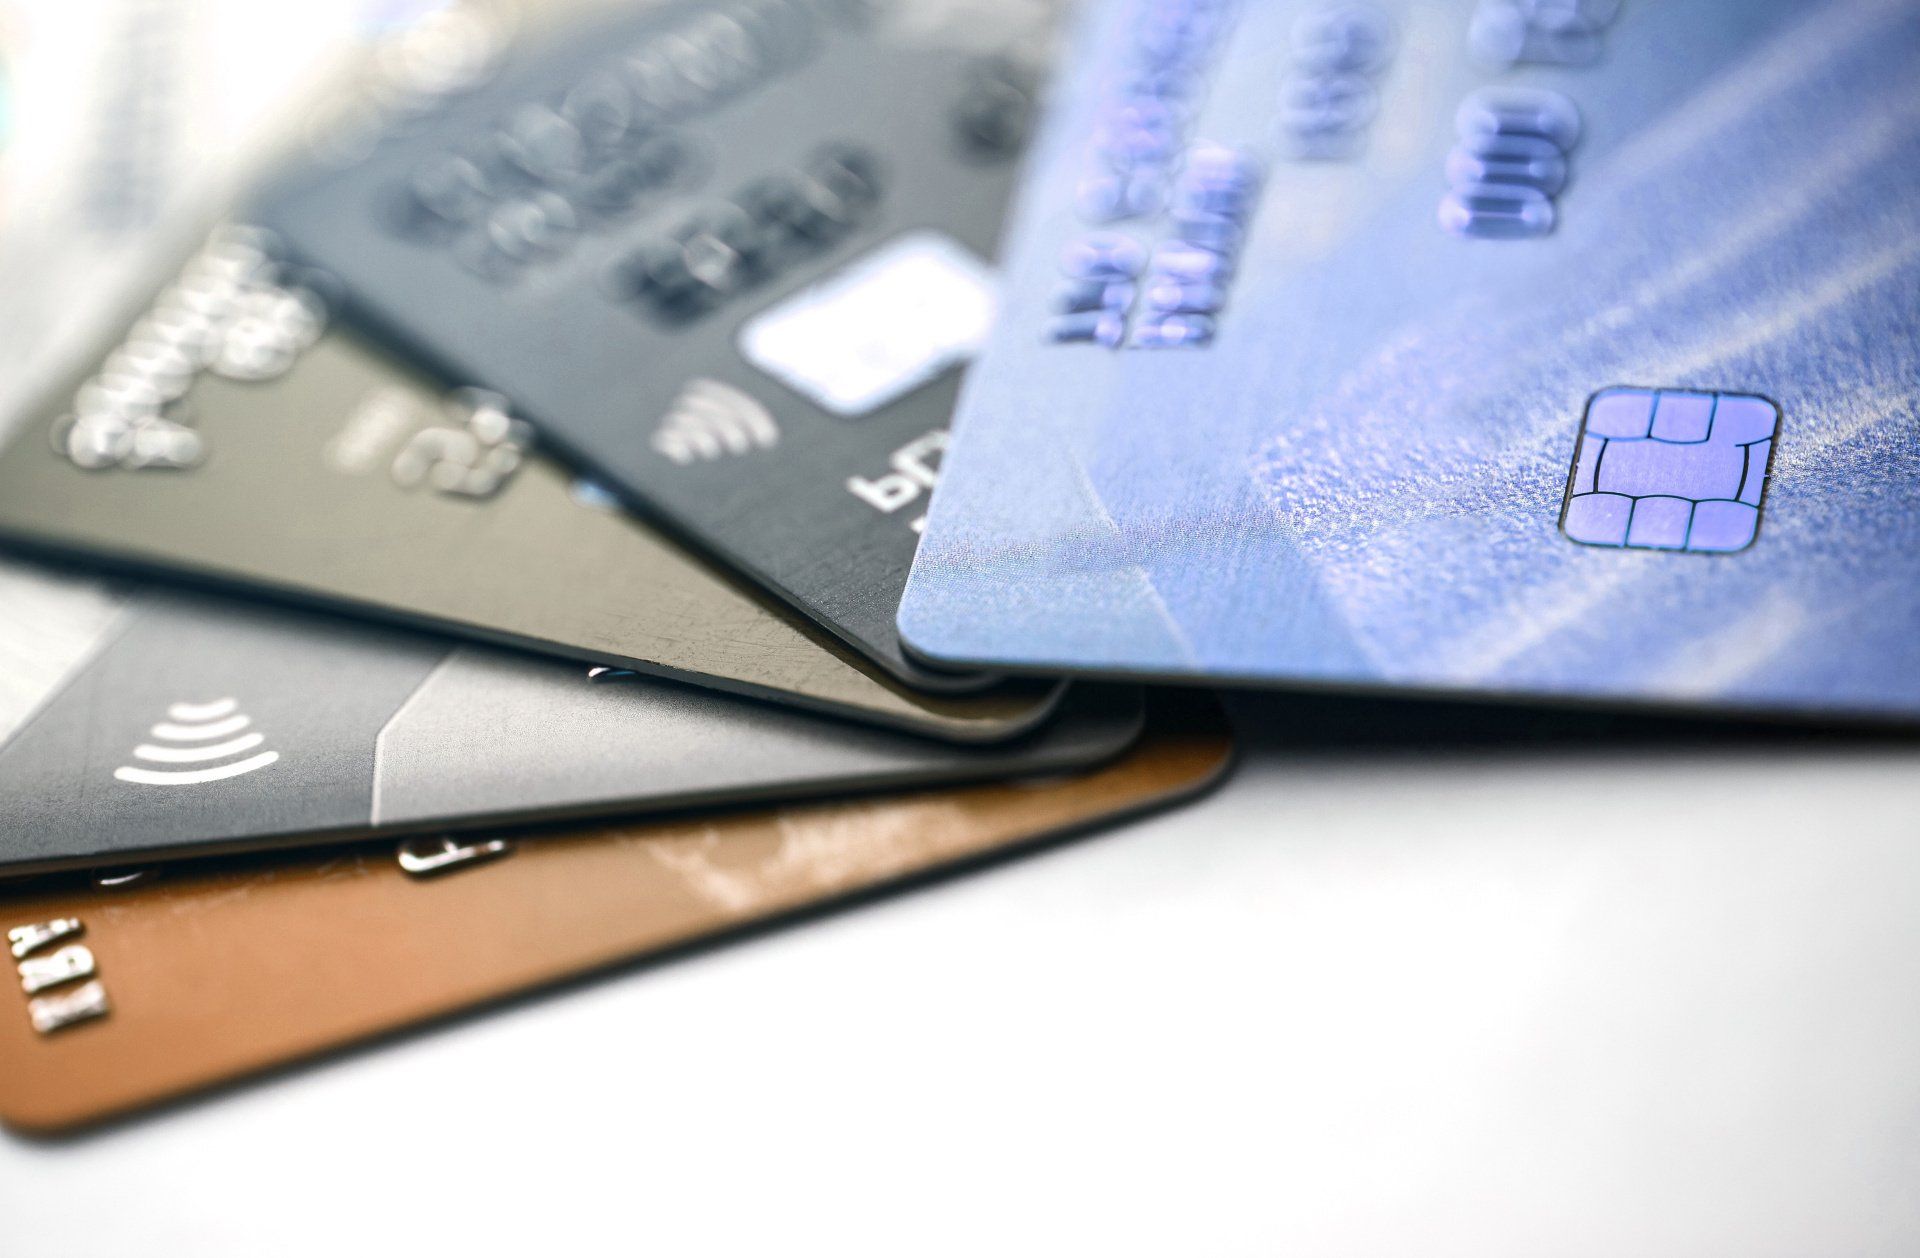 2021 List of “Major” Credit Card Companies and How to Get Their Cards